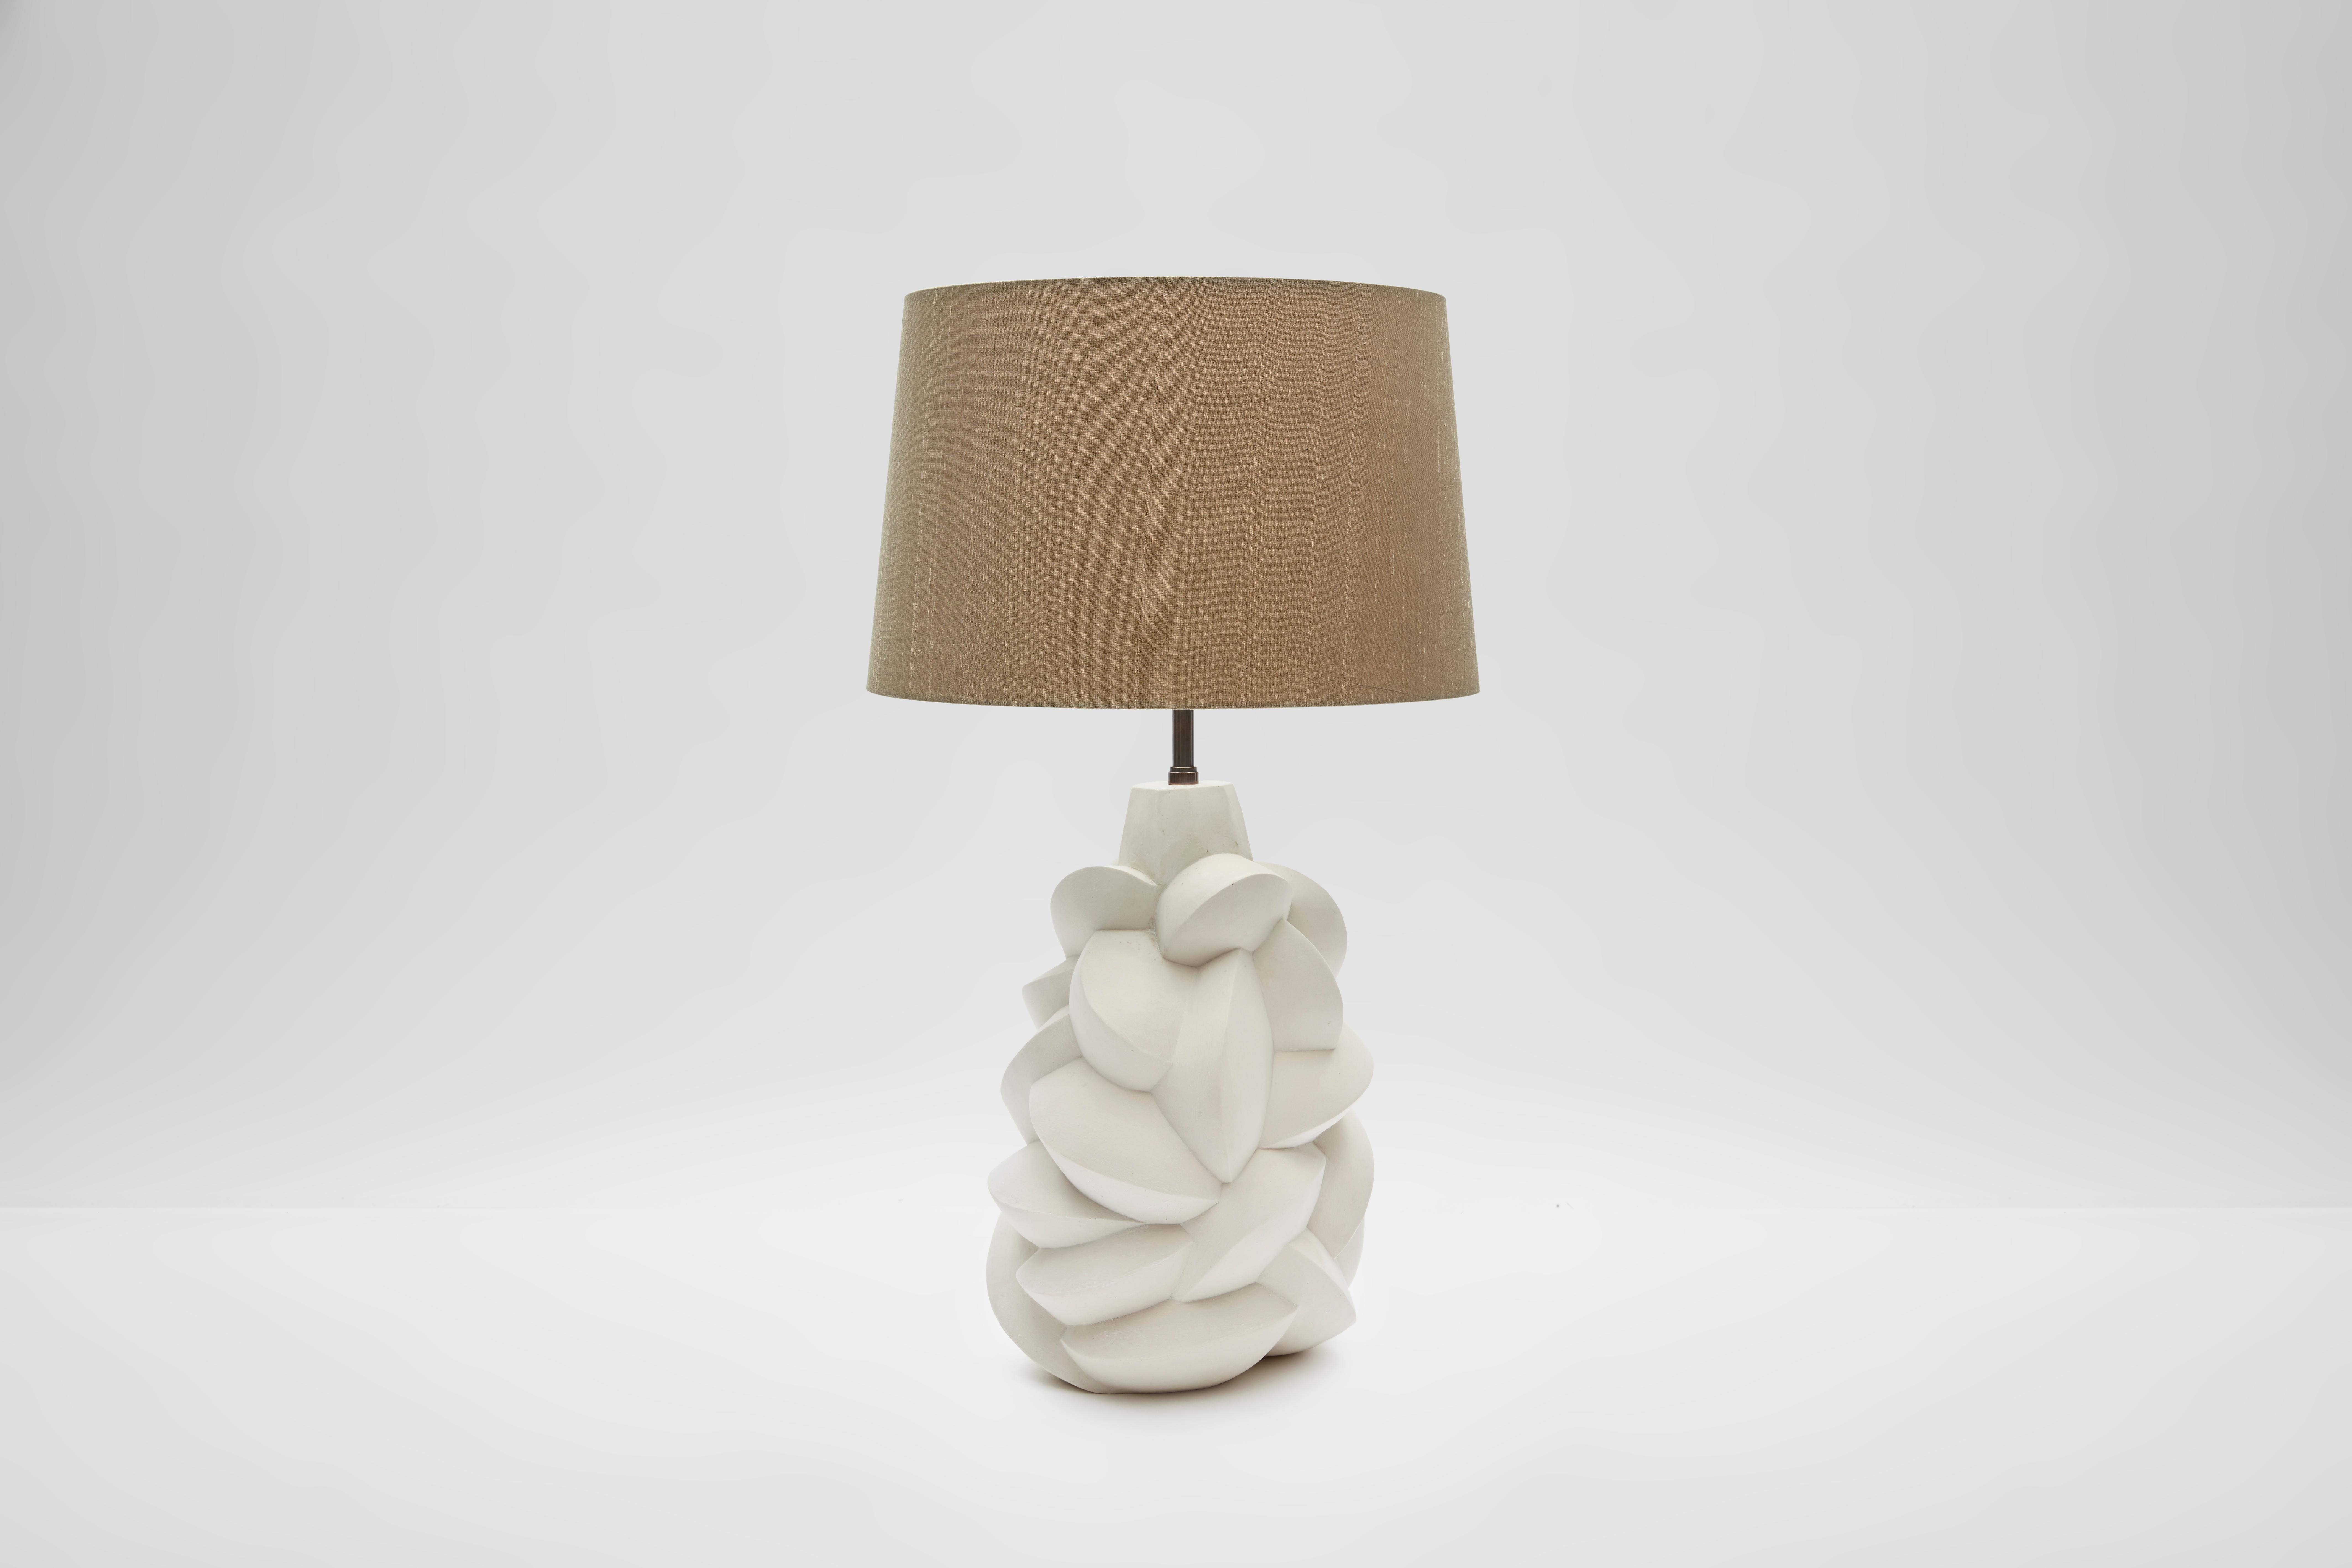 Victoria plaster lamp by Victoria Ellis (commissioned by Simon Orrell Design)
Height 35cm Width 22cm (at base) Depth 22cm
Finish: Plaster / Lamp fittings: Bronze
Plug and inline switch: Black or White / Flex: Black, White, Gold, Bronze or